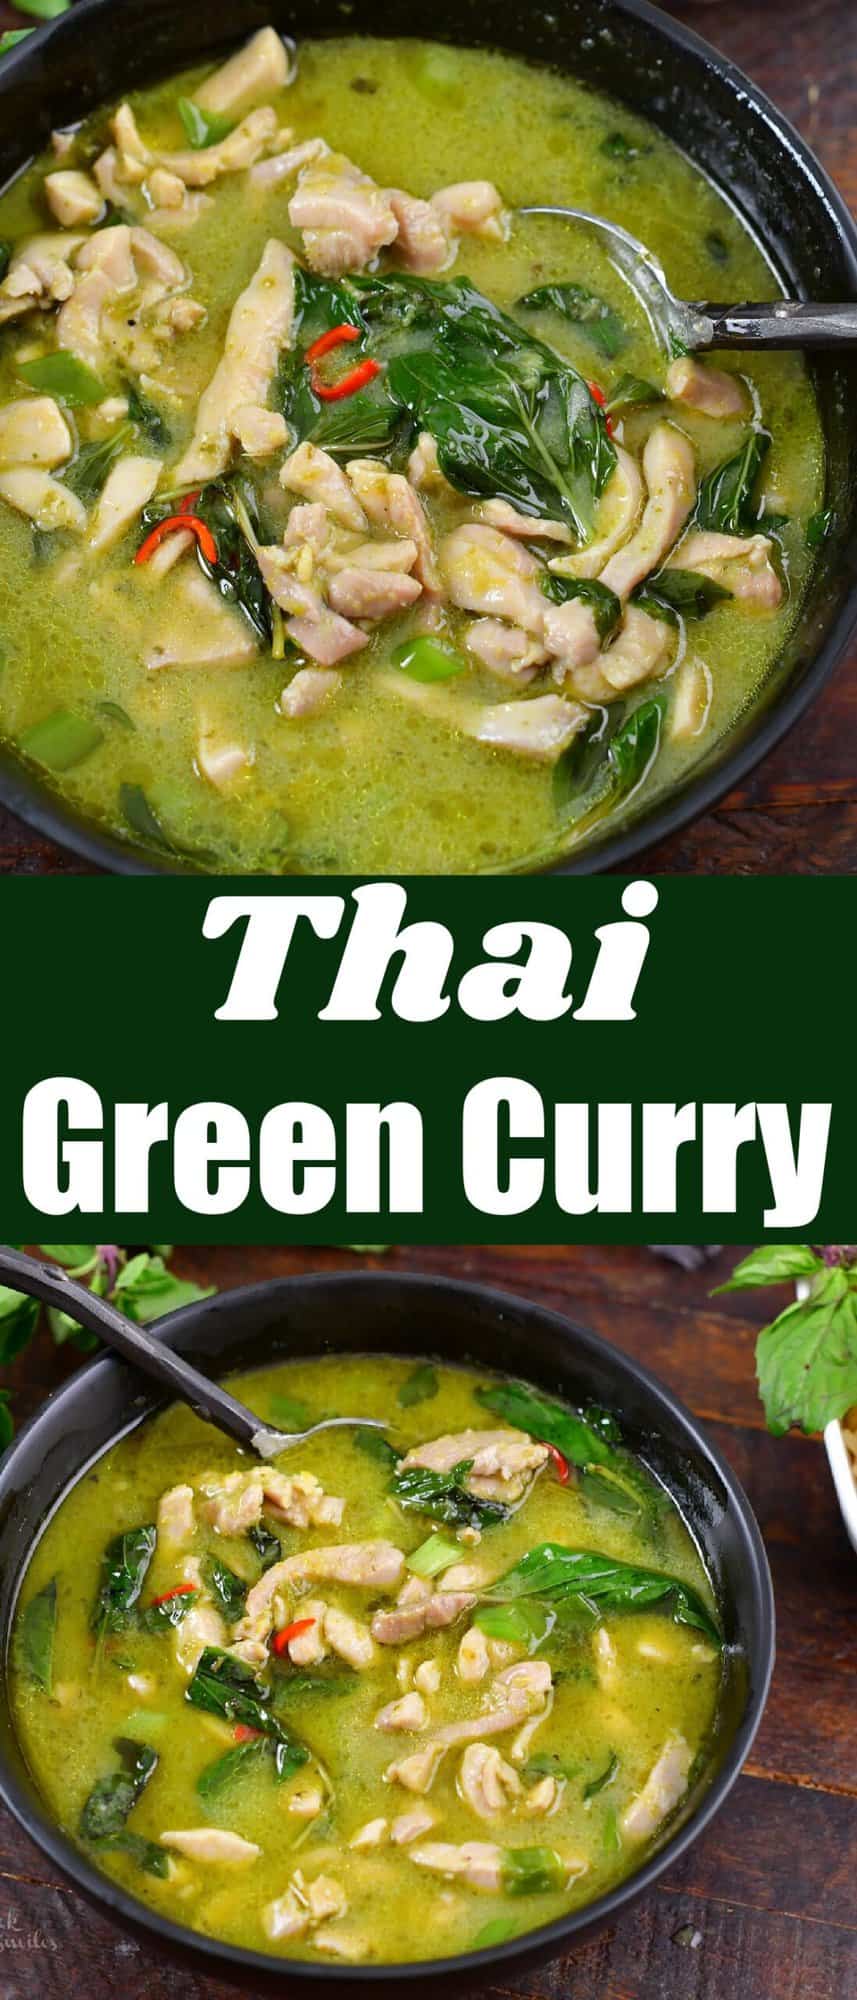 collage of two images of chicken green curry in a black bowl